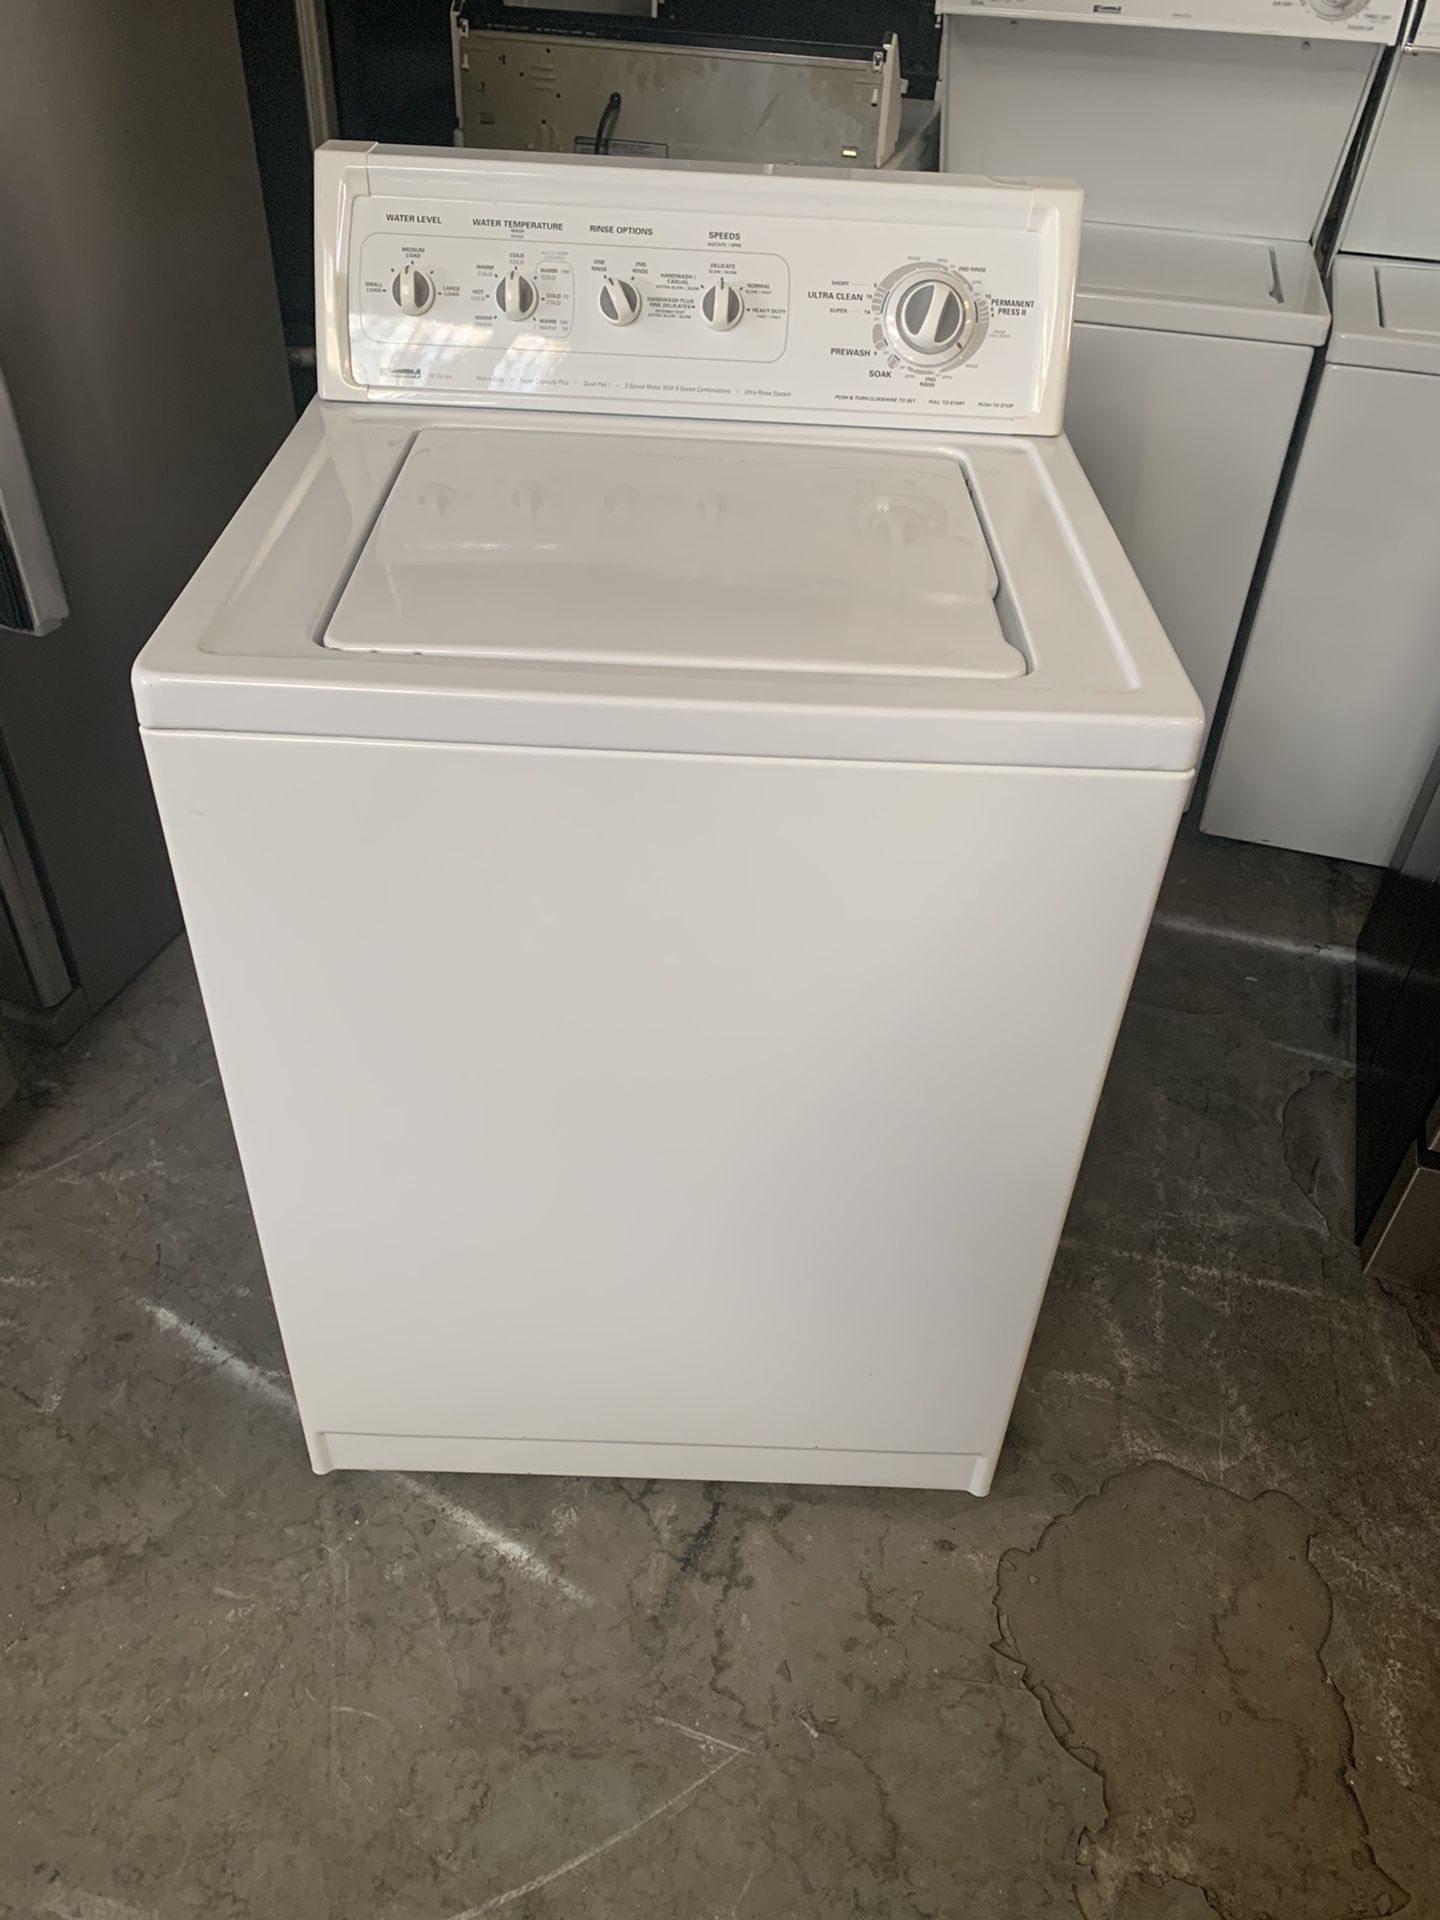 Washer brand kenmor everything is good working condition 90 days warranty